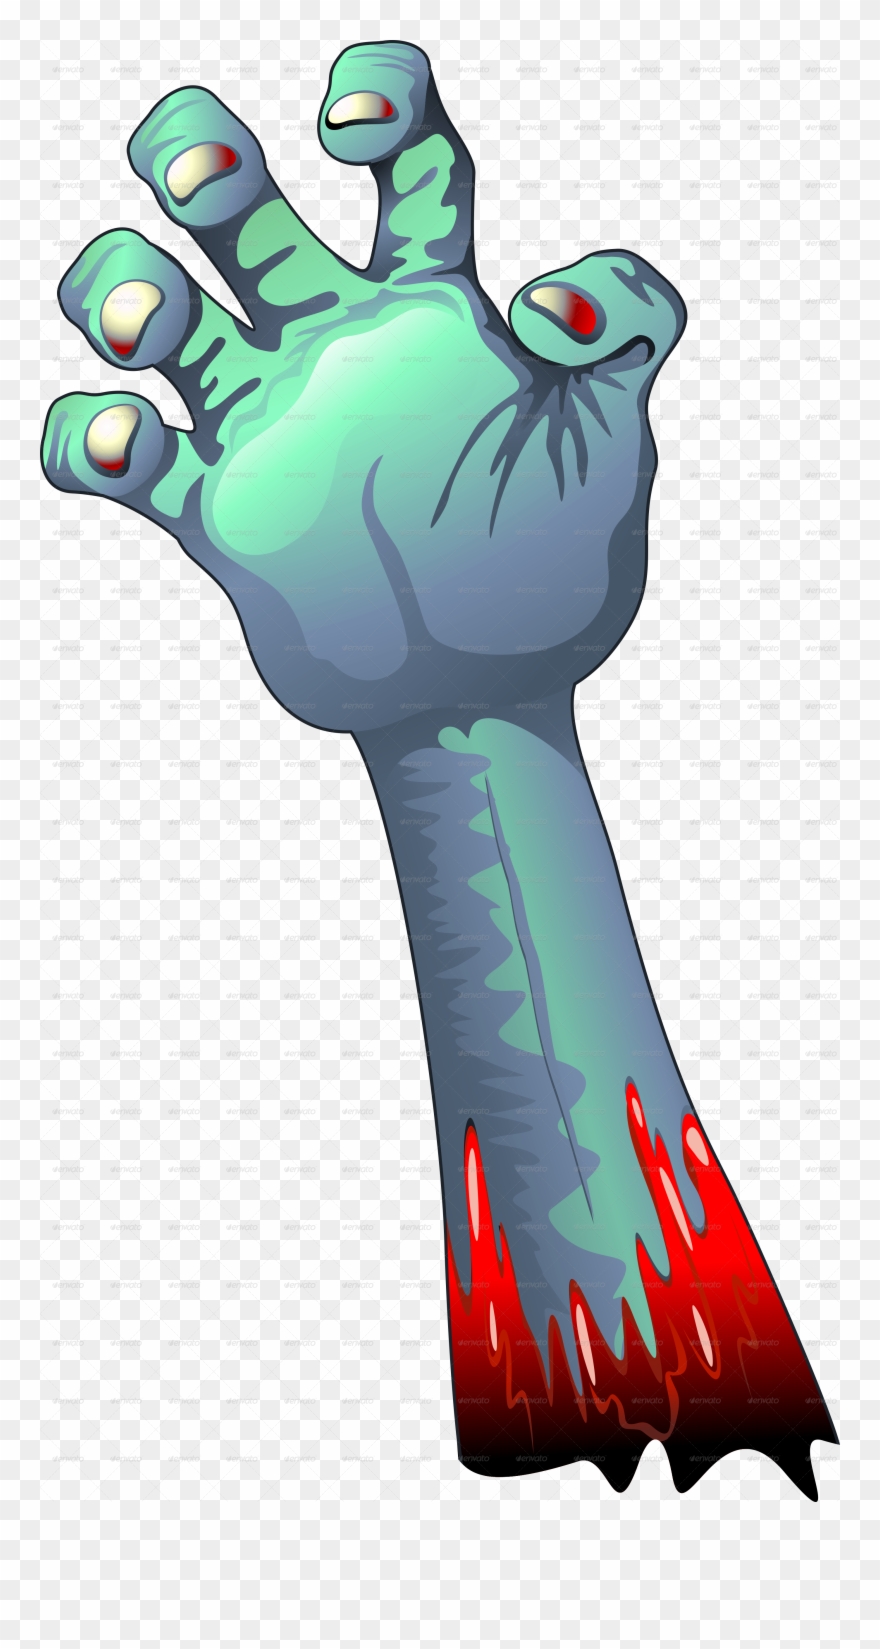 Zombie Hand Cartoon Png Clipart (#1779045).